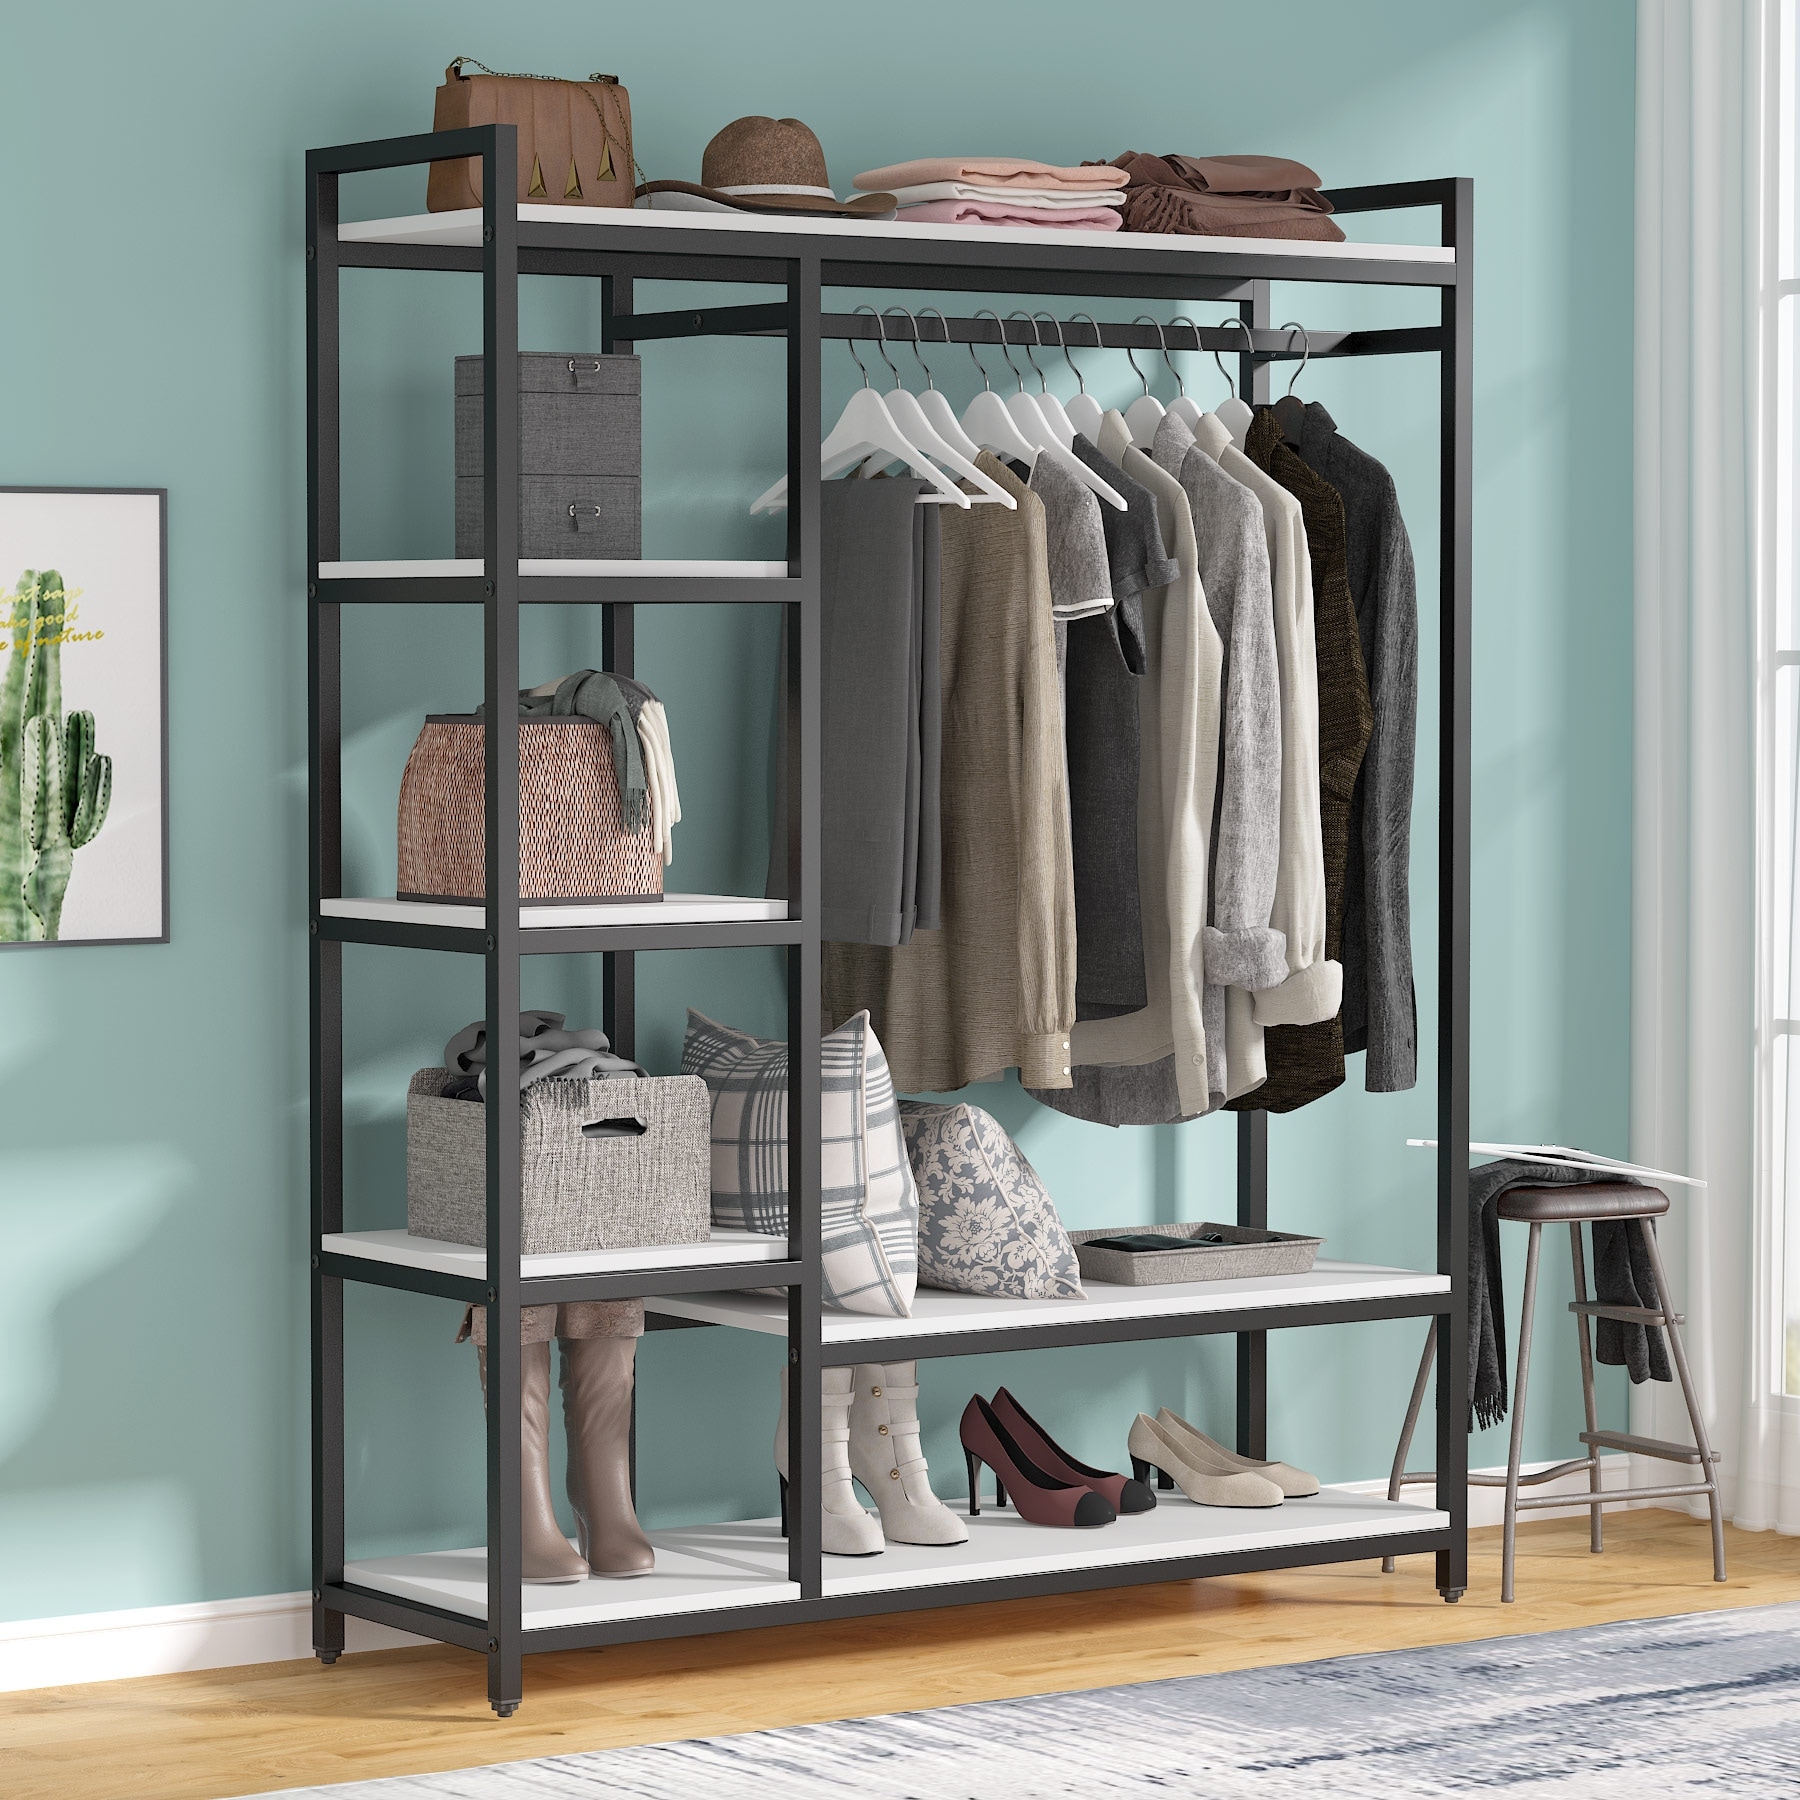 https://ak1.ostkcdn.com/images/products/is/images/direct/4d6d2ff60b7bf8988ad44db26539ae89a9b44709/Free-standing-Closet-Organizer-Garment-Rack-with-6-Shelf-1-Hanging-Bar.jpg